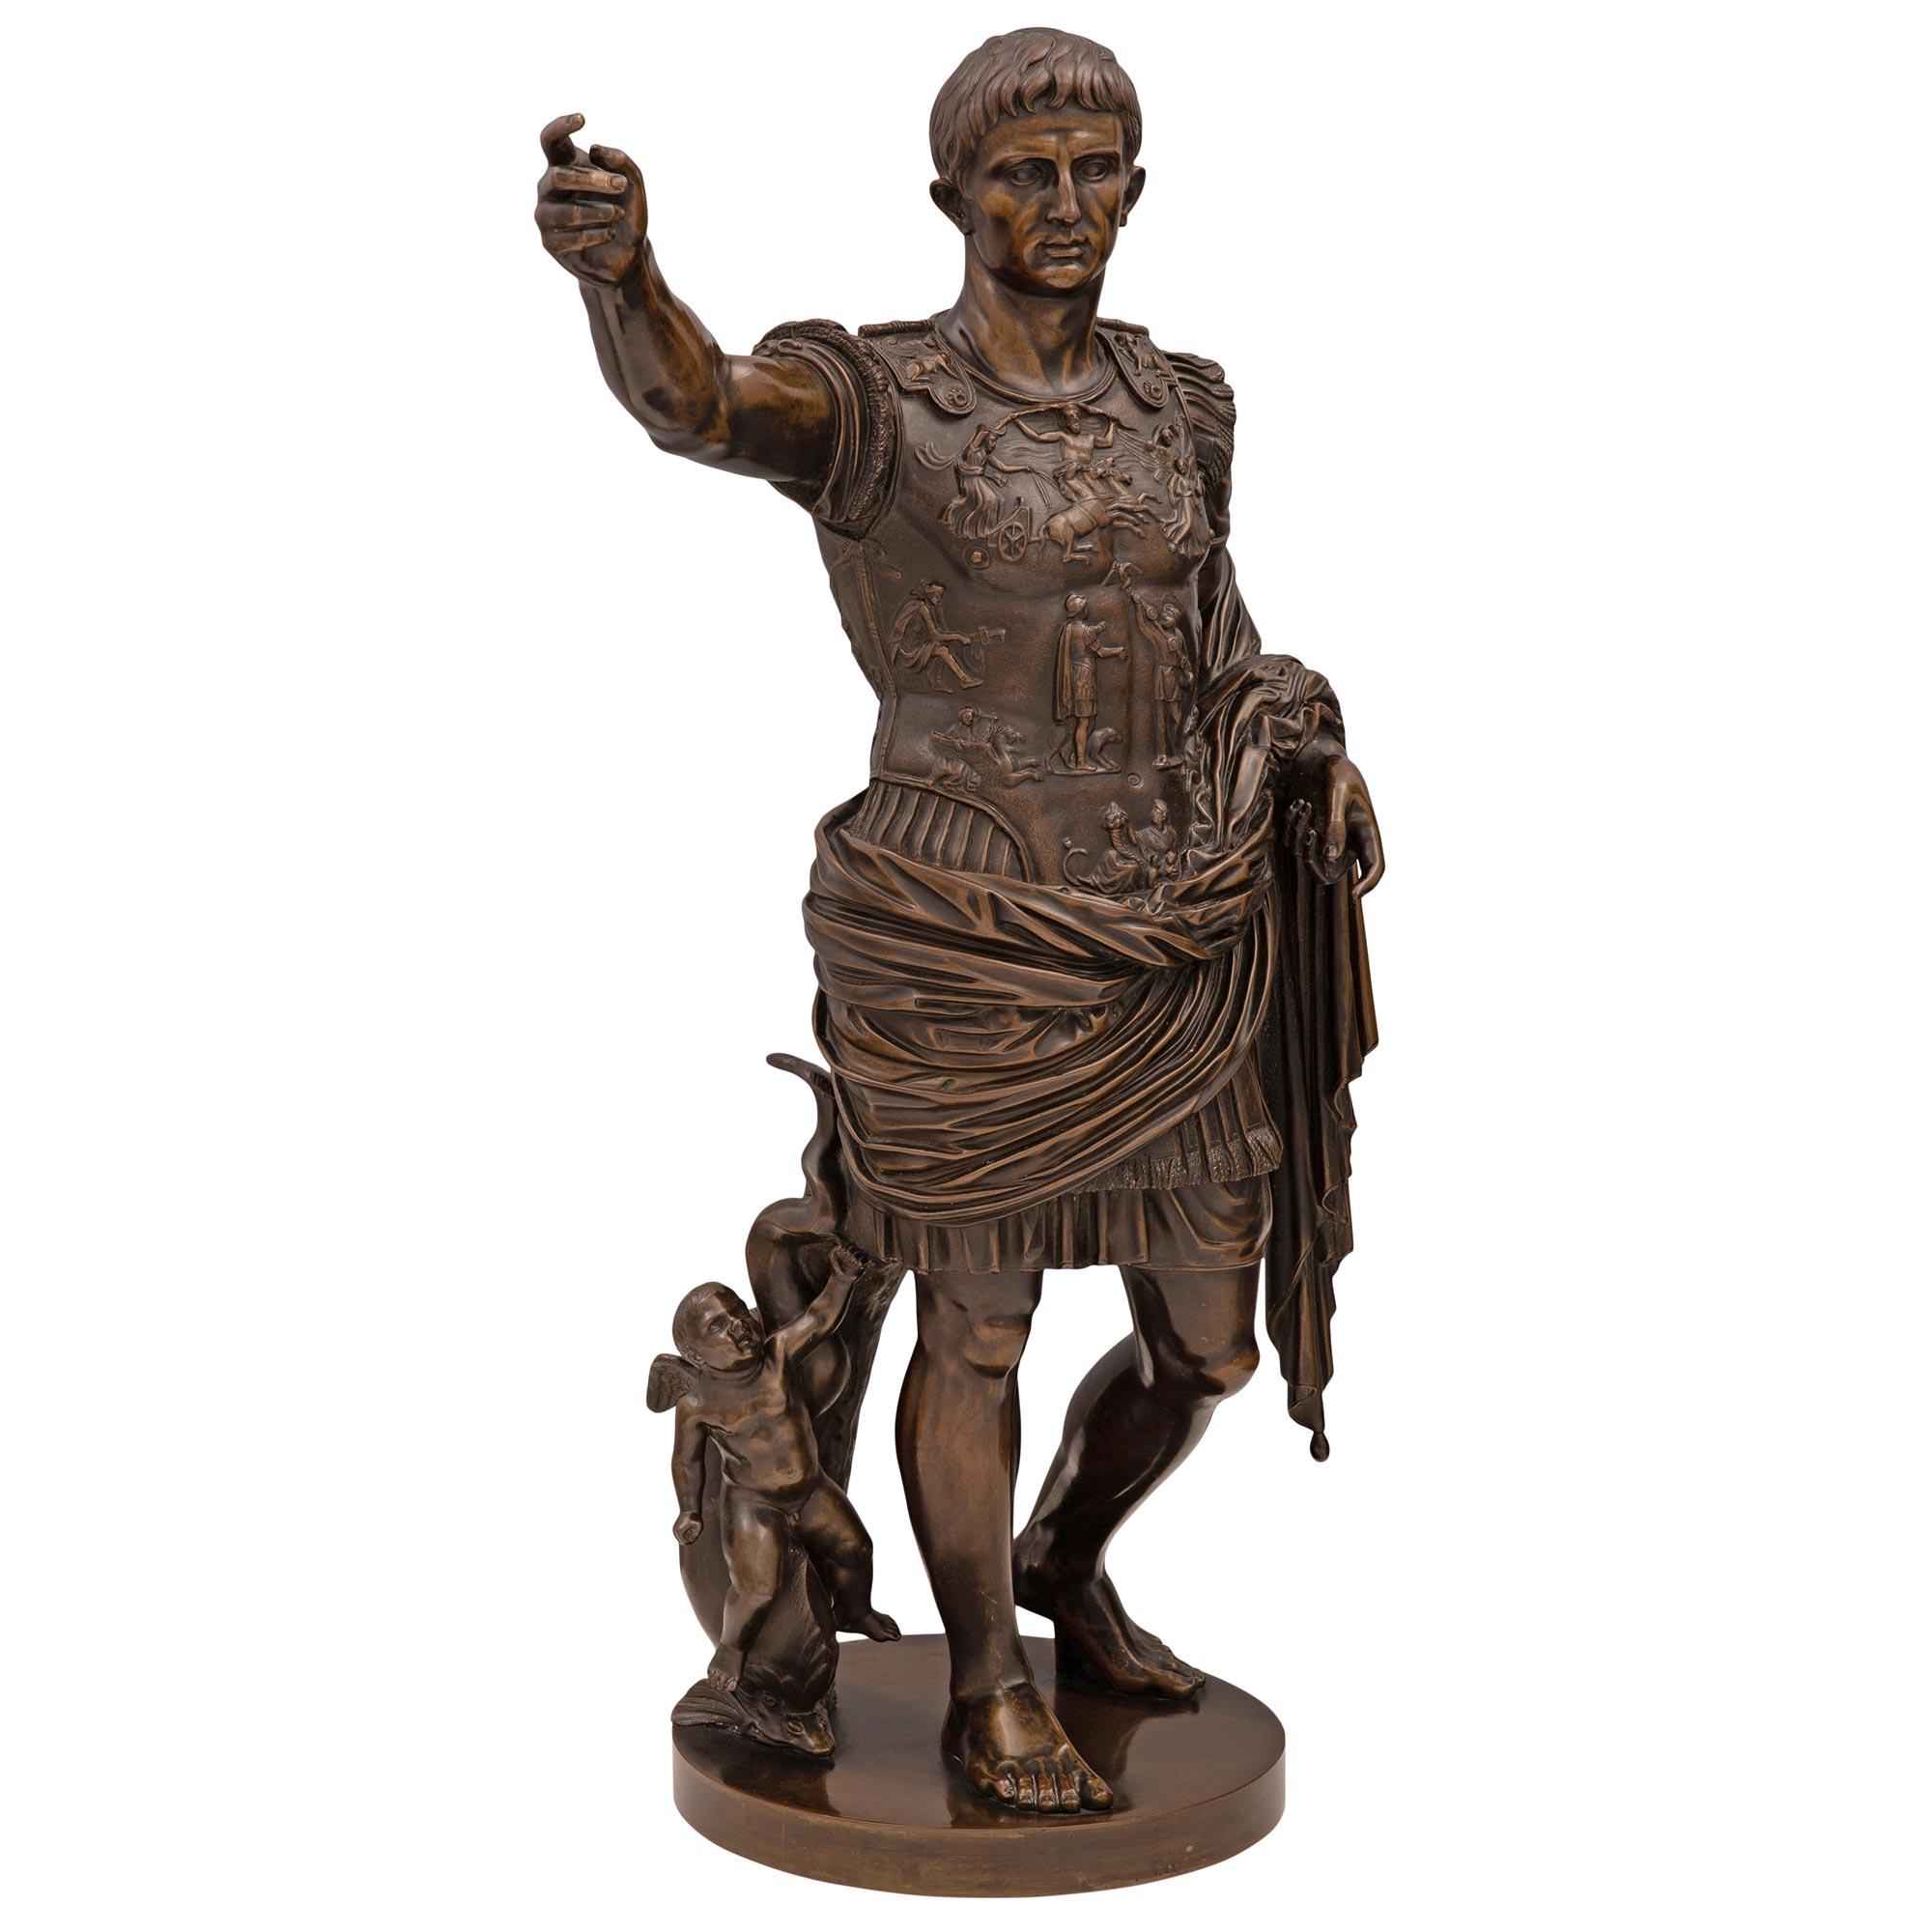 A handsome and high quality Italian 19th century patinated bronze statue of Augustus of Prima Porta. The statue is raised by a circular base where the emperor stands proudly with his right arm raised. He is draped in a wonderfully executed flowing